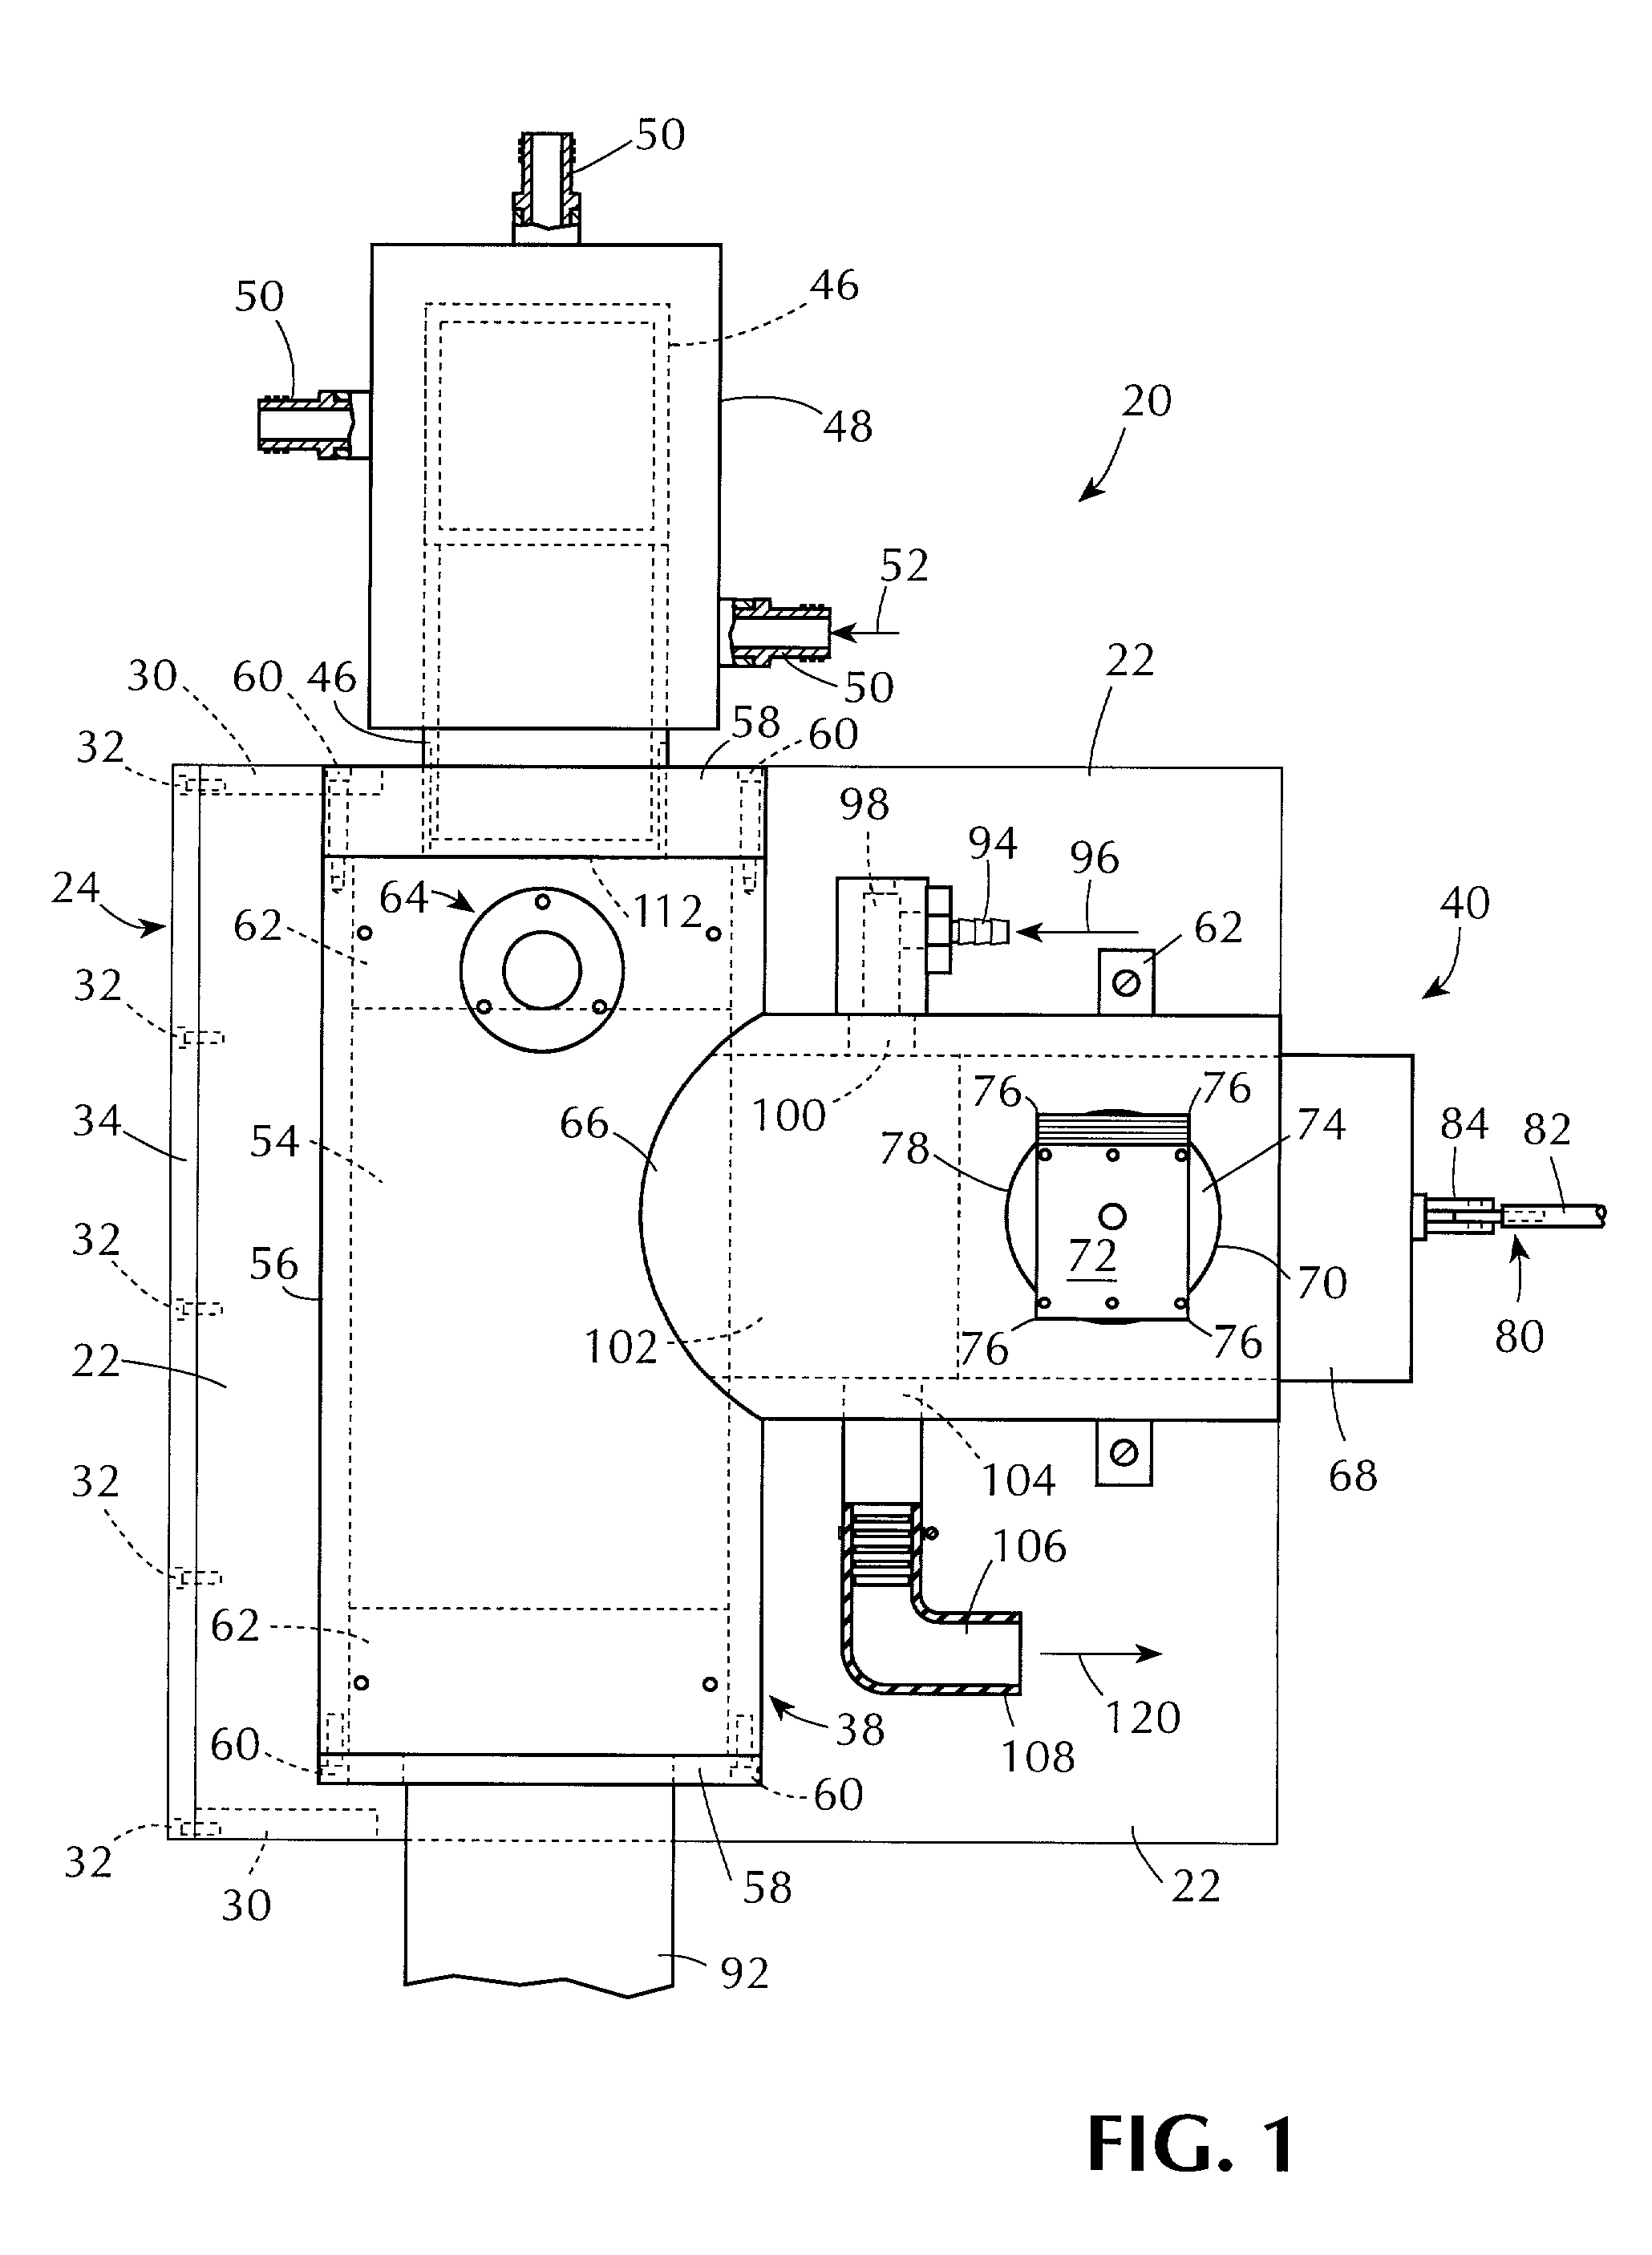 Apparatus for testing sterilization methods and materials